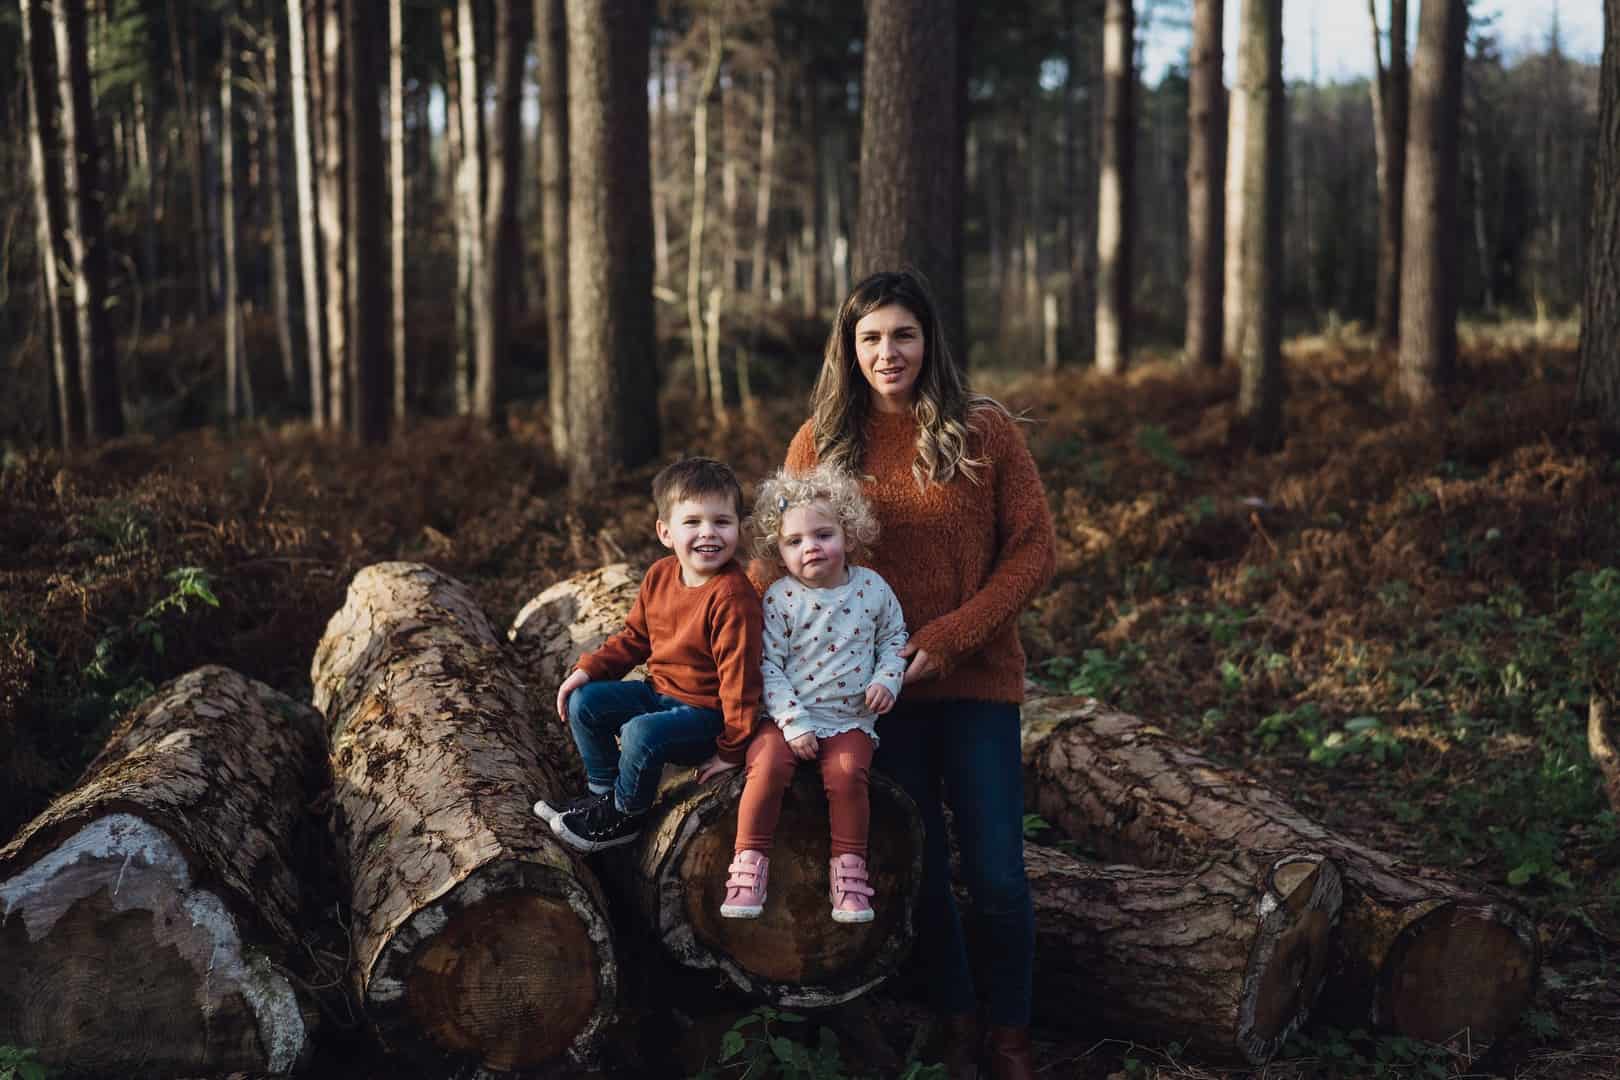 FAMILY PHOTOGRAPHER IN CHESHIRE